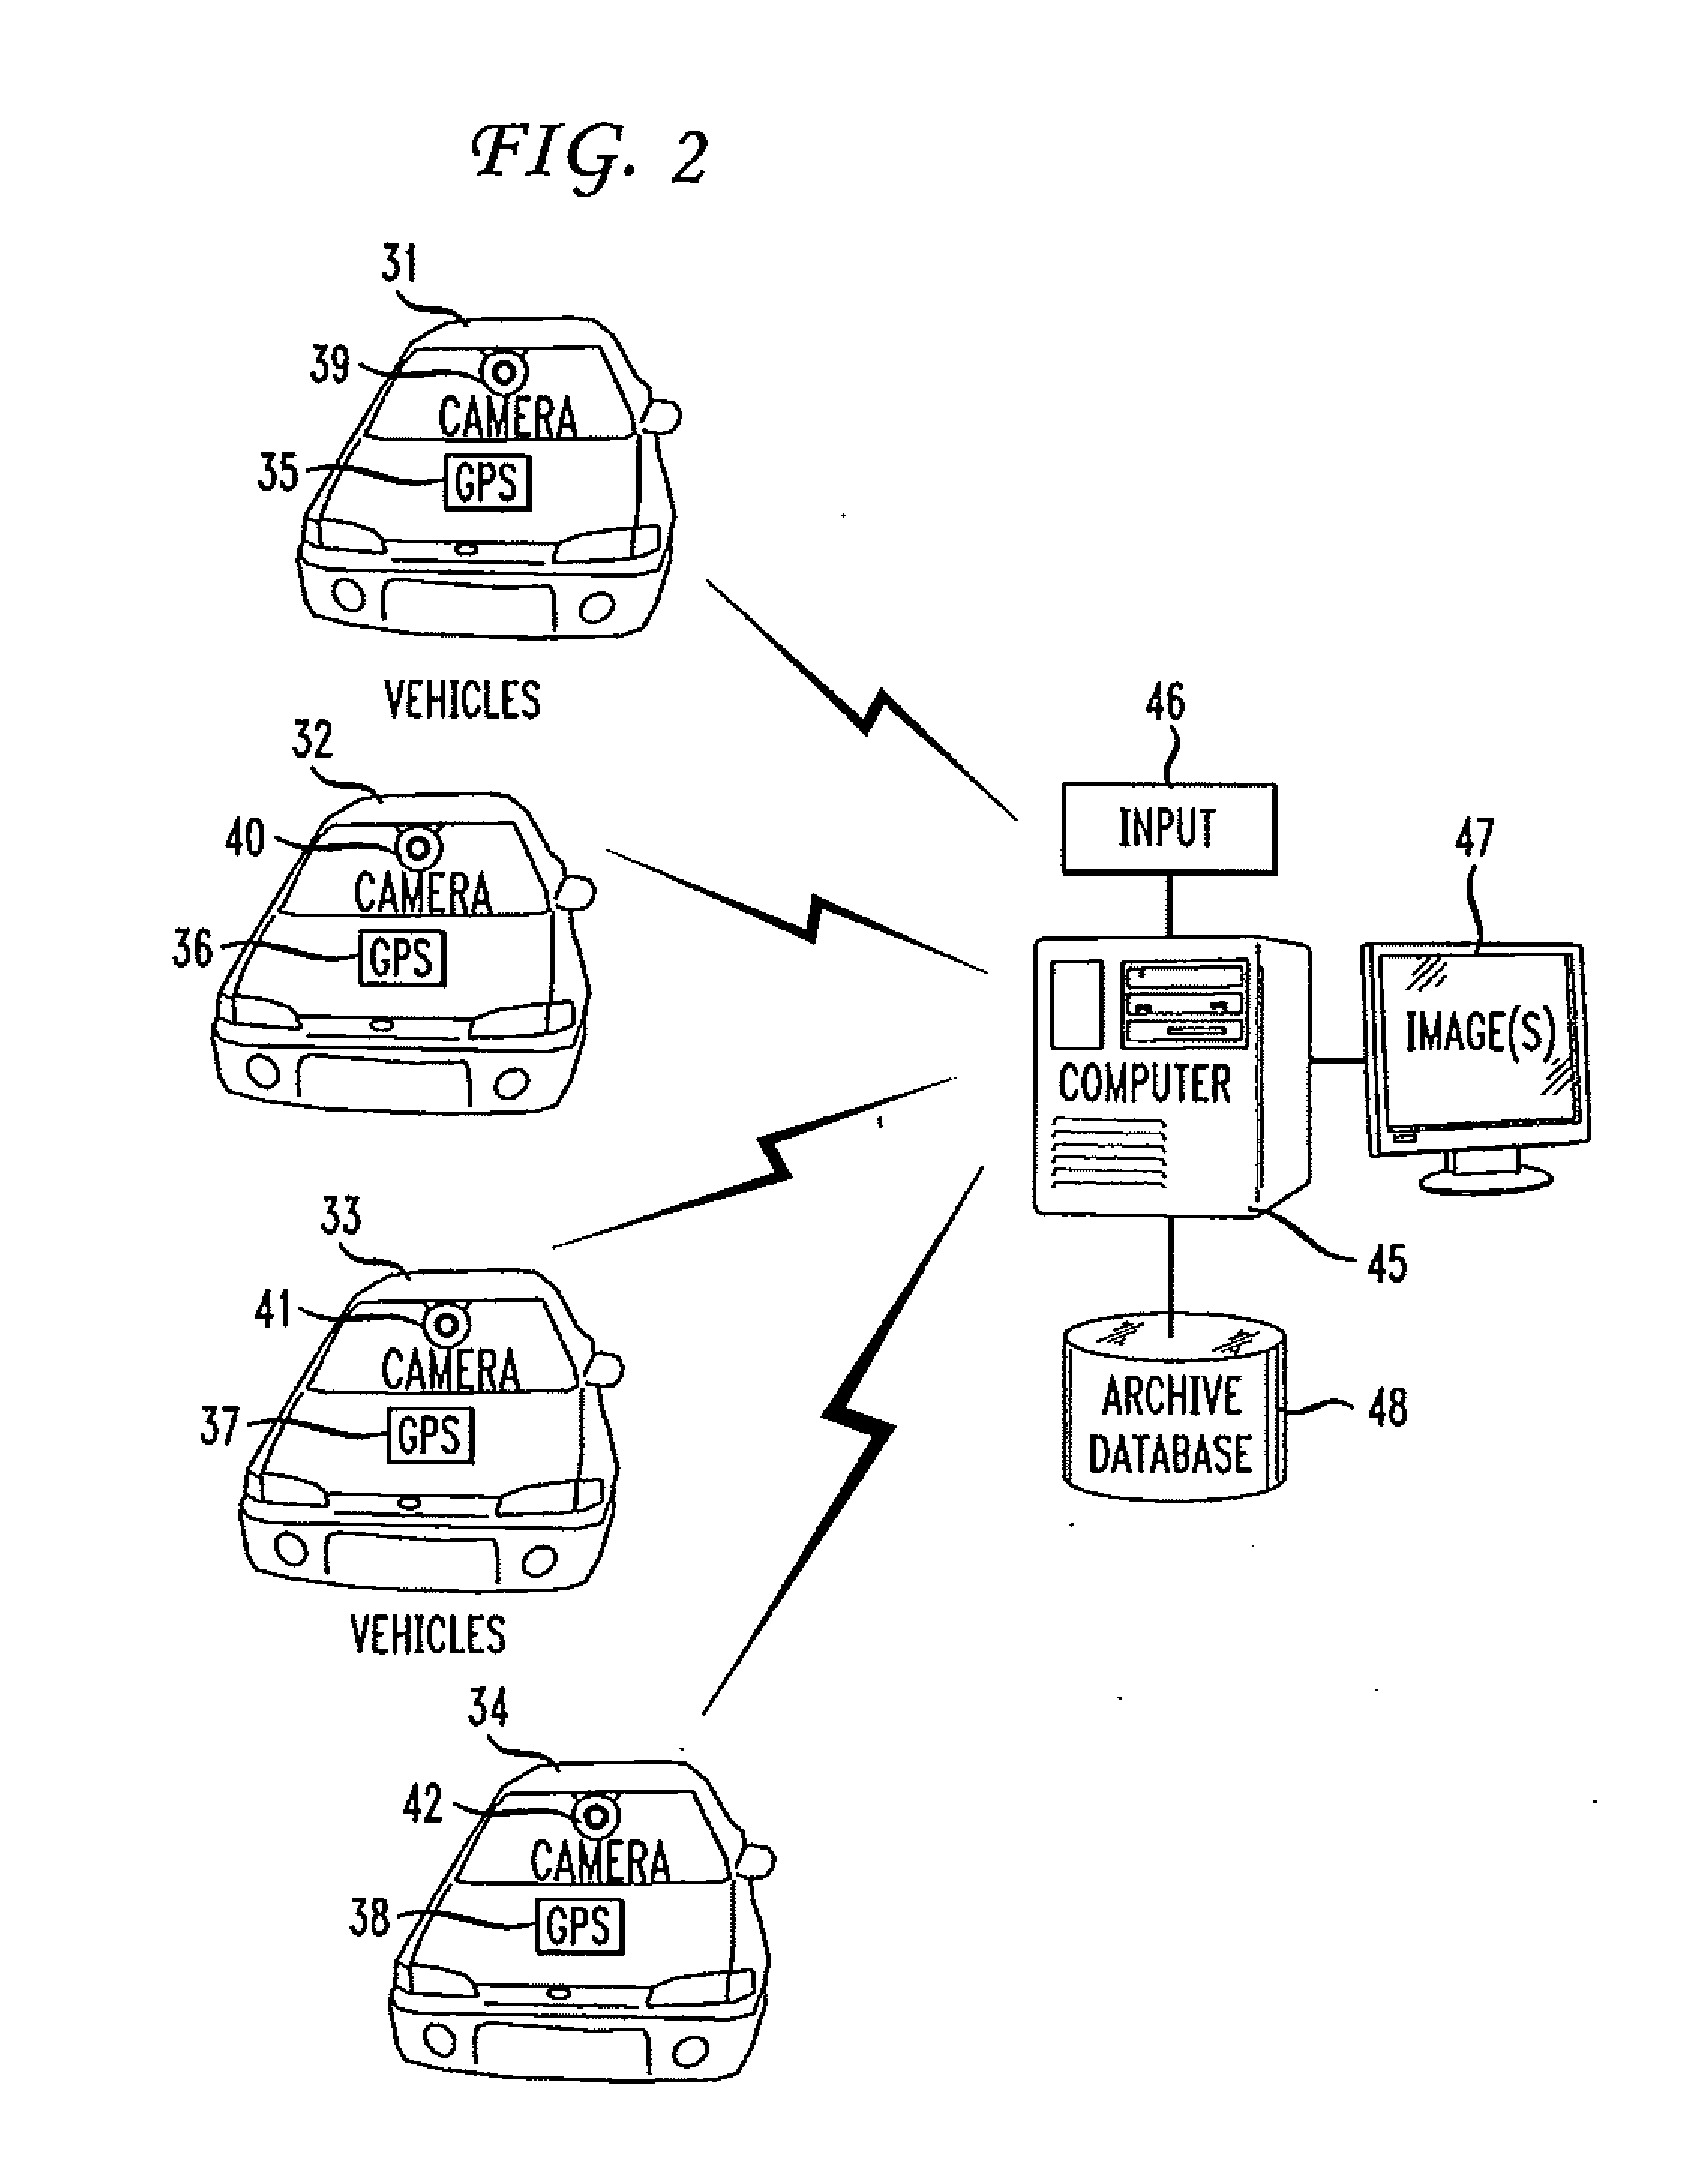 Image Data Collection From Mobile Vehicles With Computer, GPS, and IP-Based Communication